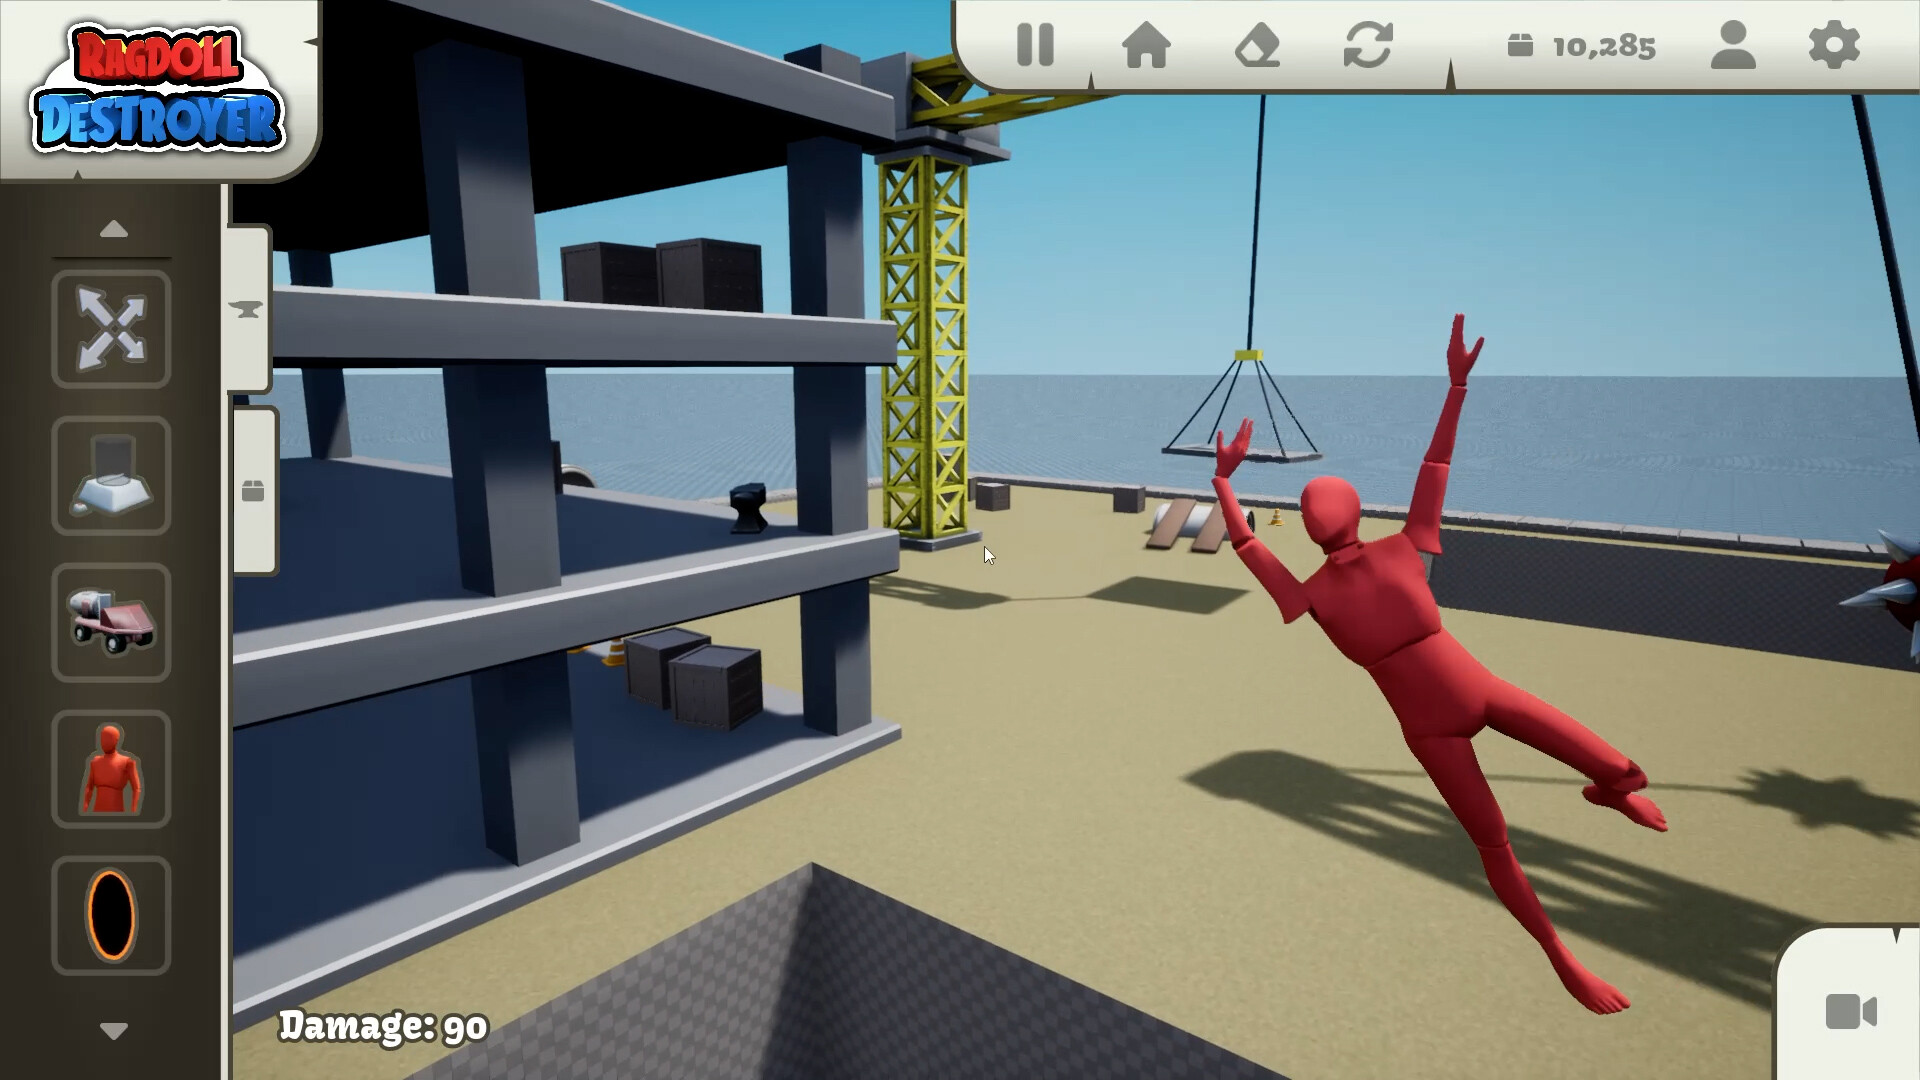 Play Ragdoll Human Workshop Online for Free on PC & Mobile